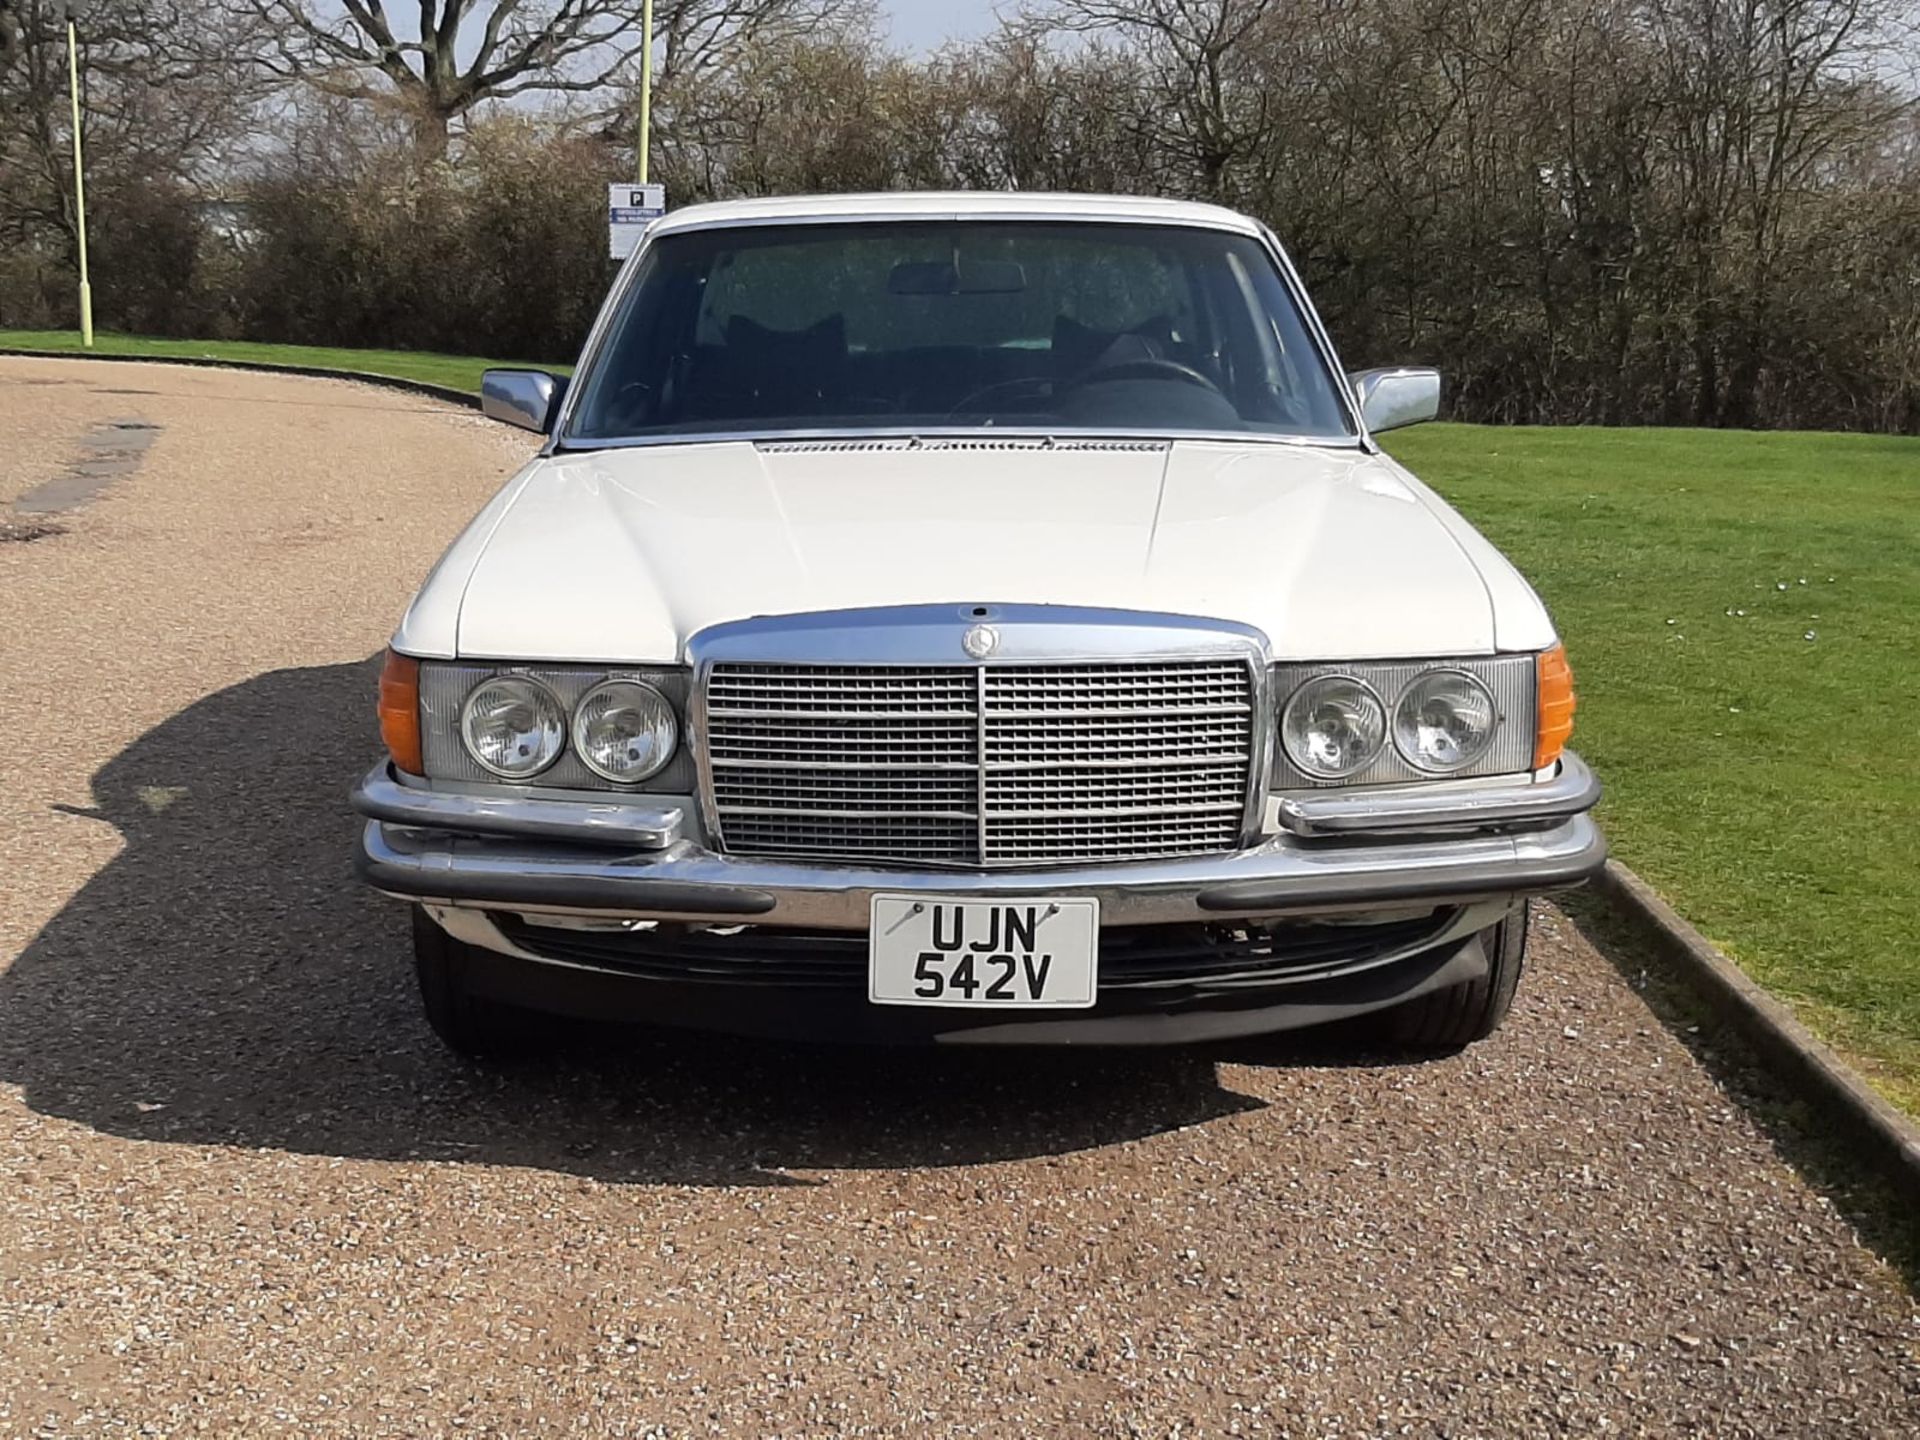 1980 Mercedes 300 SD Turbo Diesel LHD - Image 17 of 23